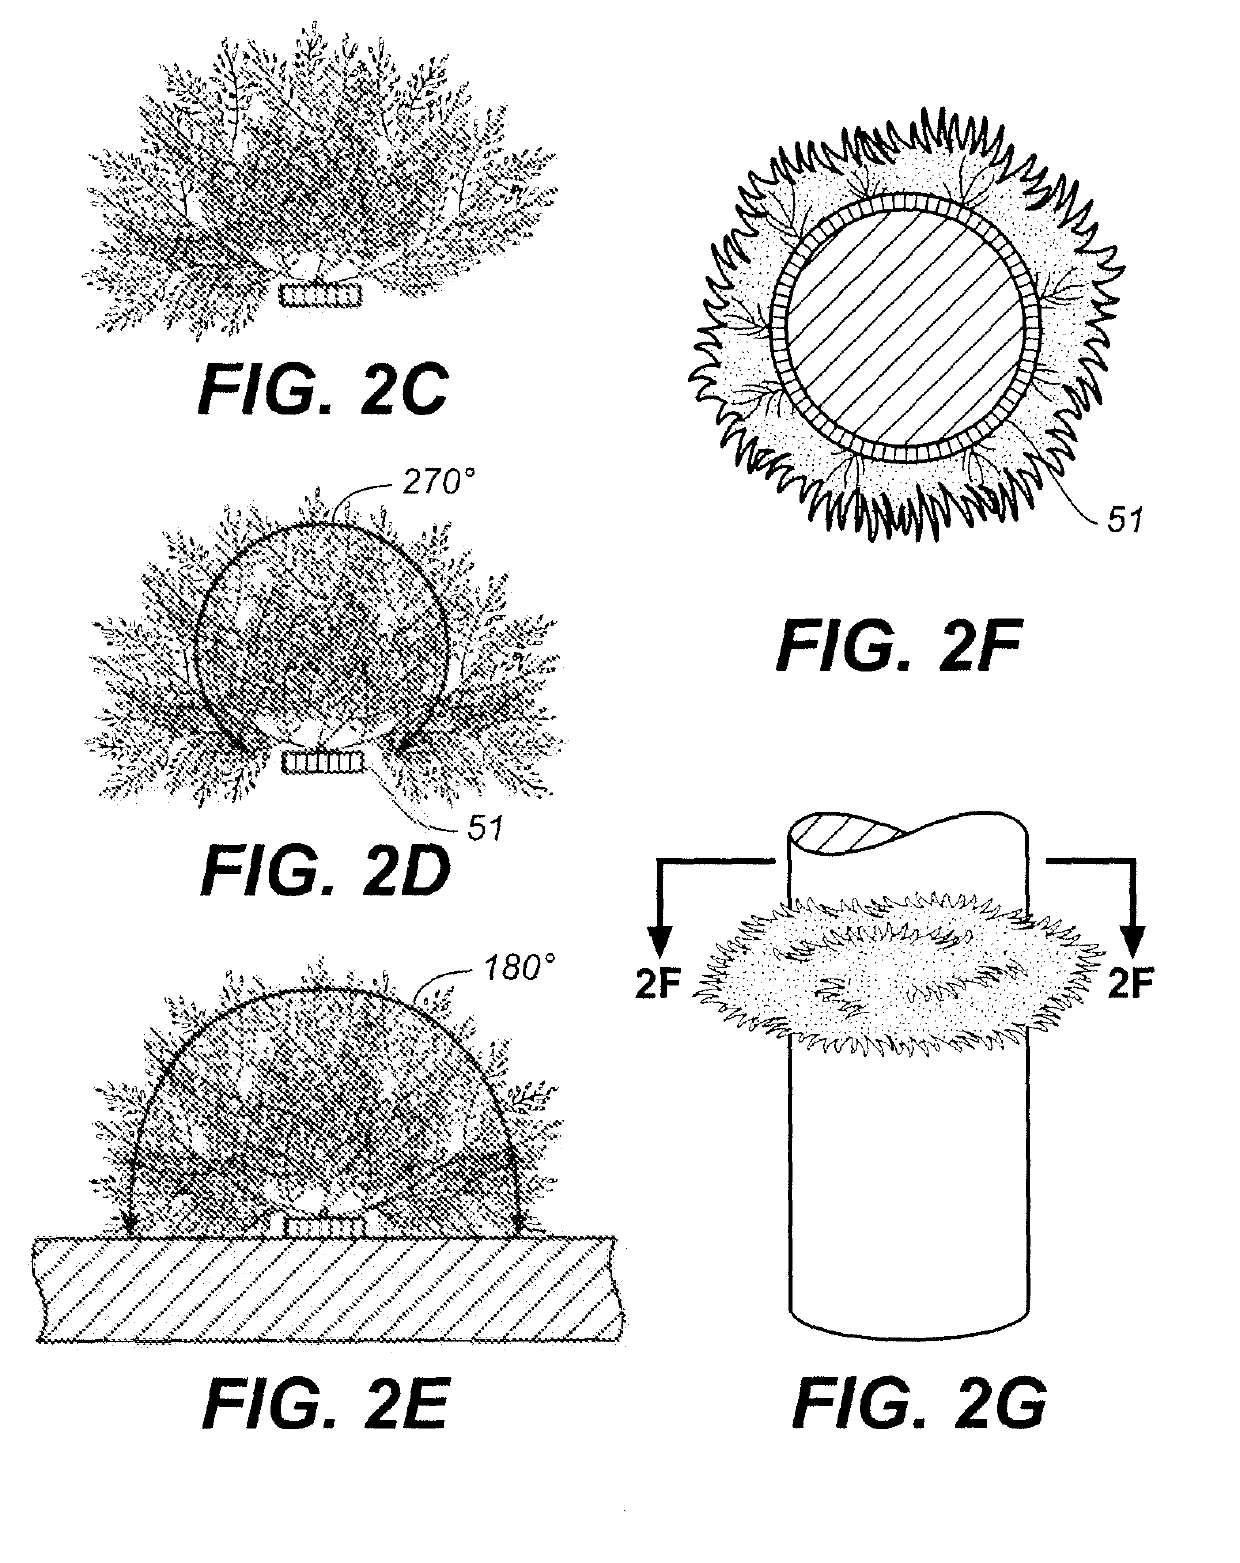 Crawling insect barrier device and corresponding method